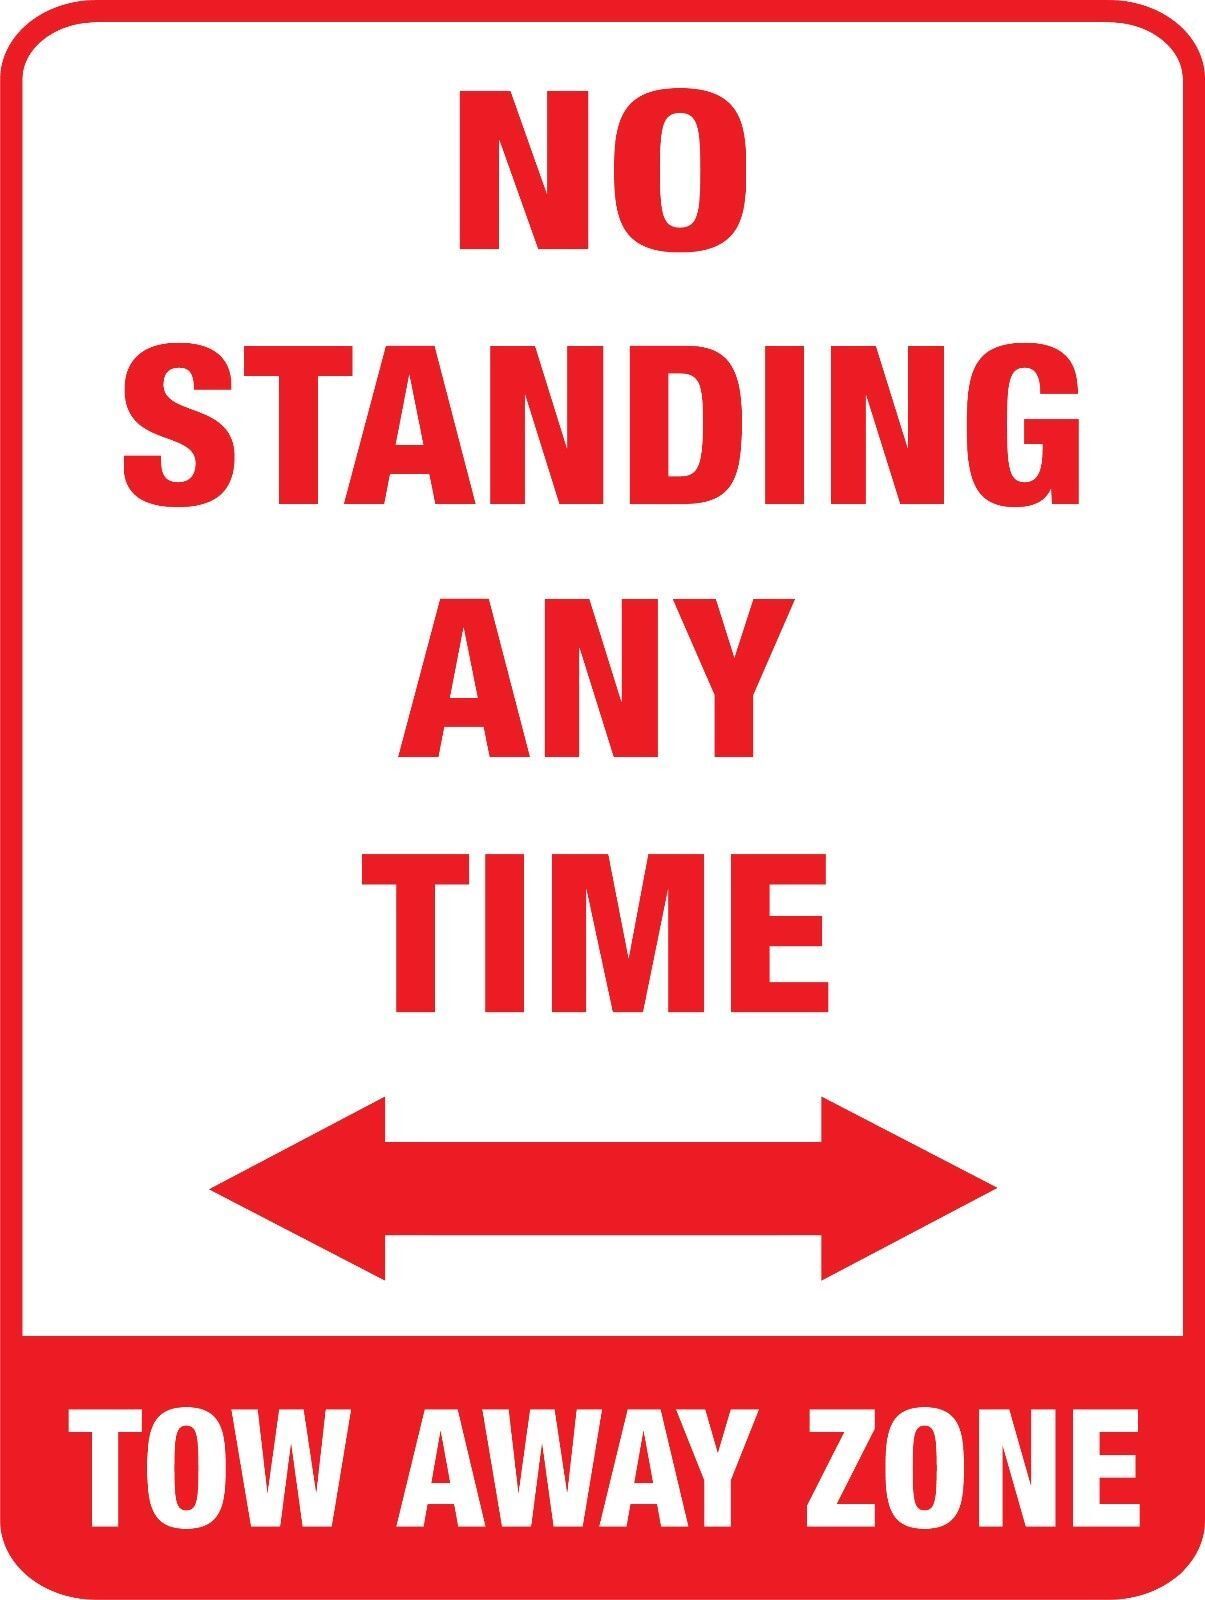 Warning Notice No Standing Any Time Tow Away Zone  Arrow Sign 200x300mm Metal Al